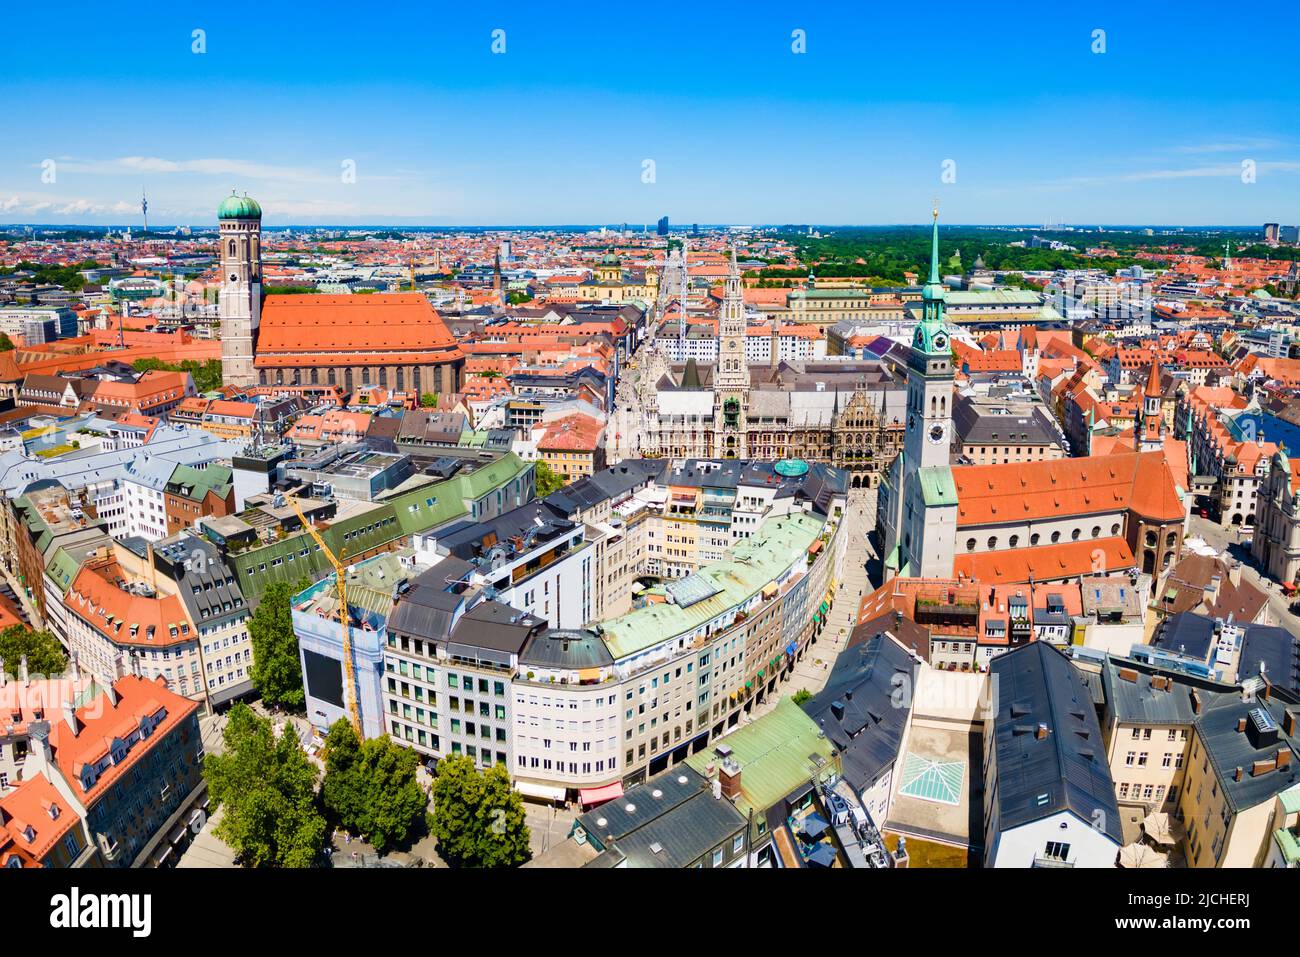 Marienplatz aerial panoramic view. Marienplatz or St. Mary square is a central square in the city centre of Munich, Germany. Stock Photo